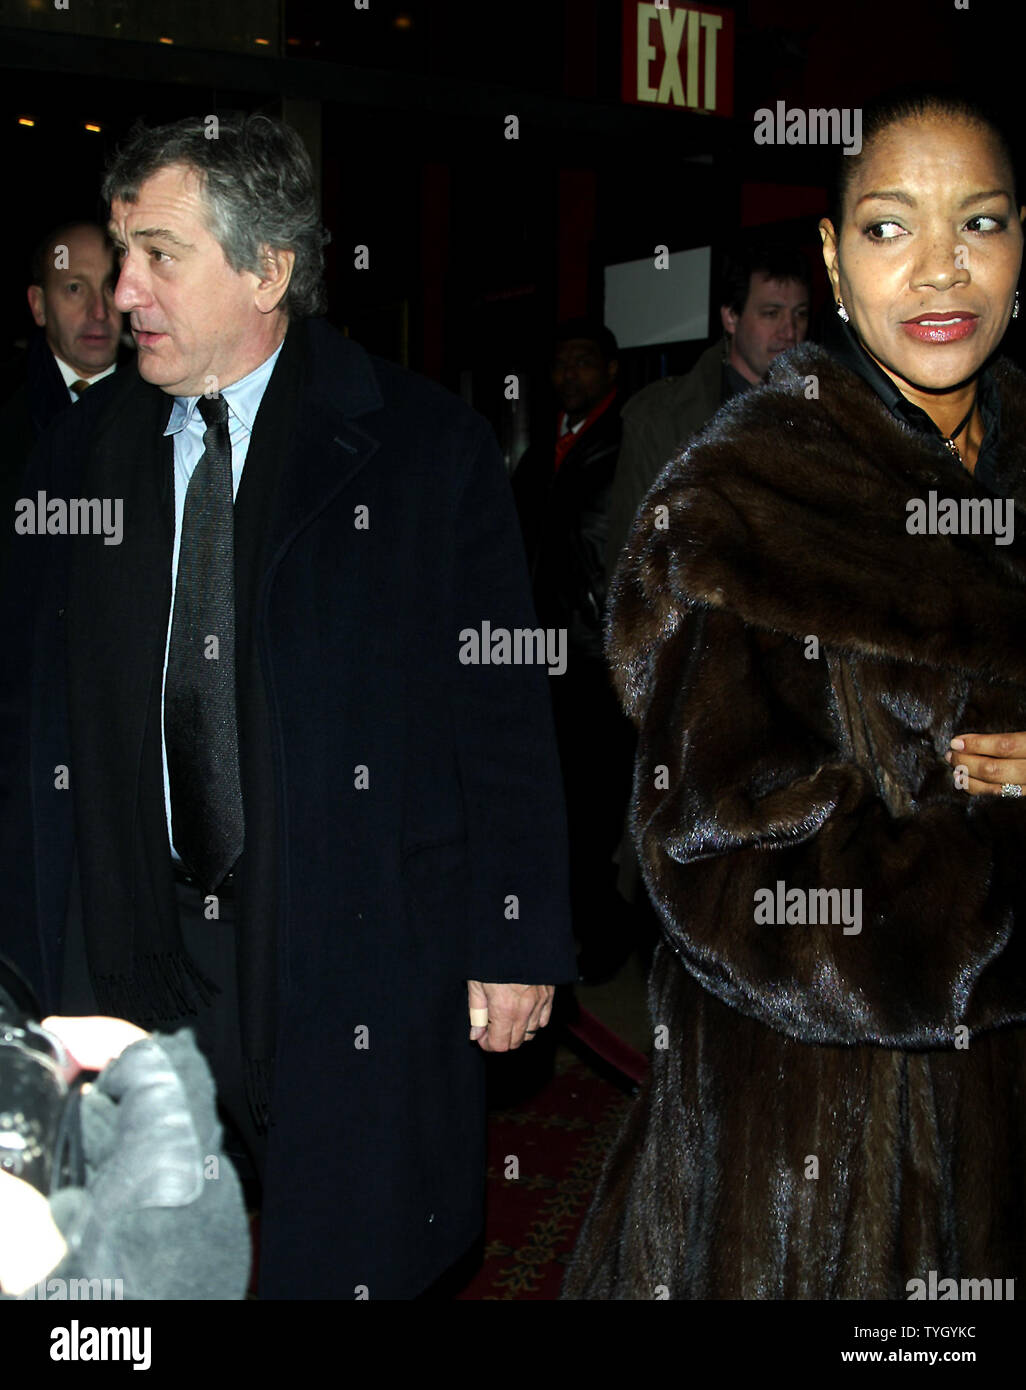 Robert and wife Grace Hightower arrive for a special 25th Anniversary premiere film "Raging Bull" to the debut of the film's Collector's Edition DVD at the Ziegfeld Theater